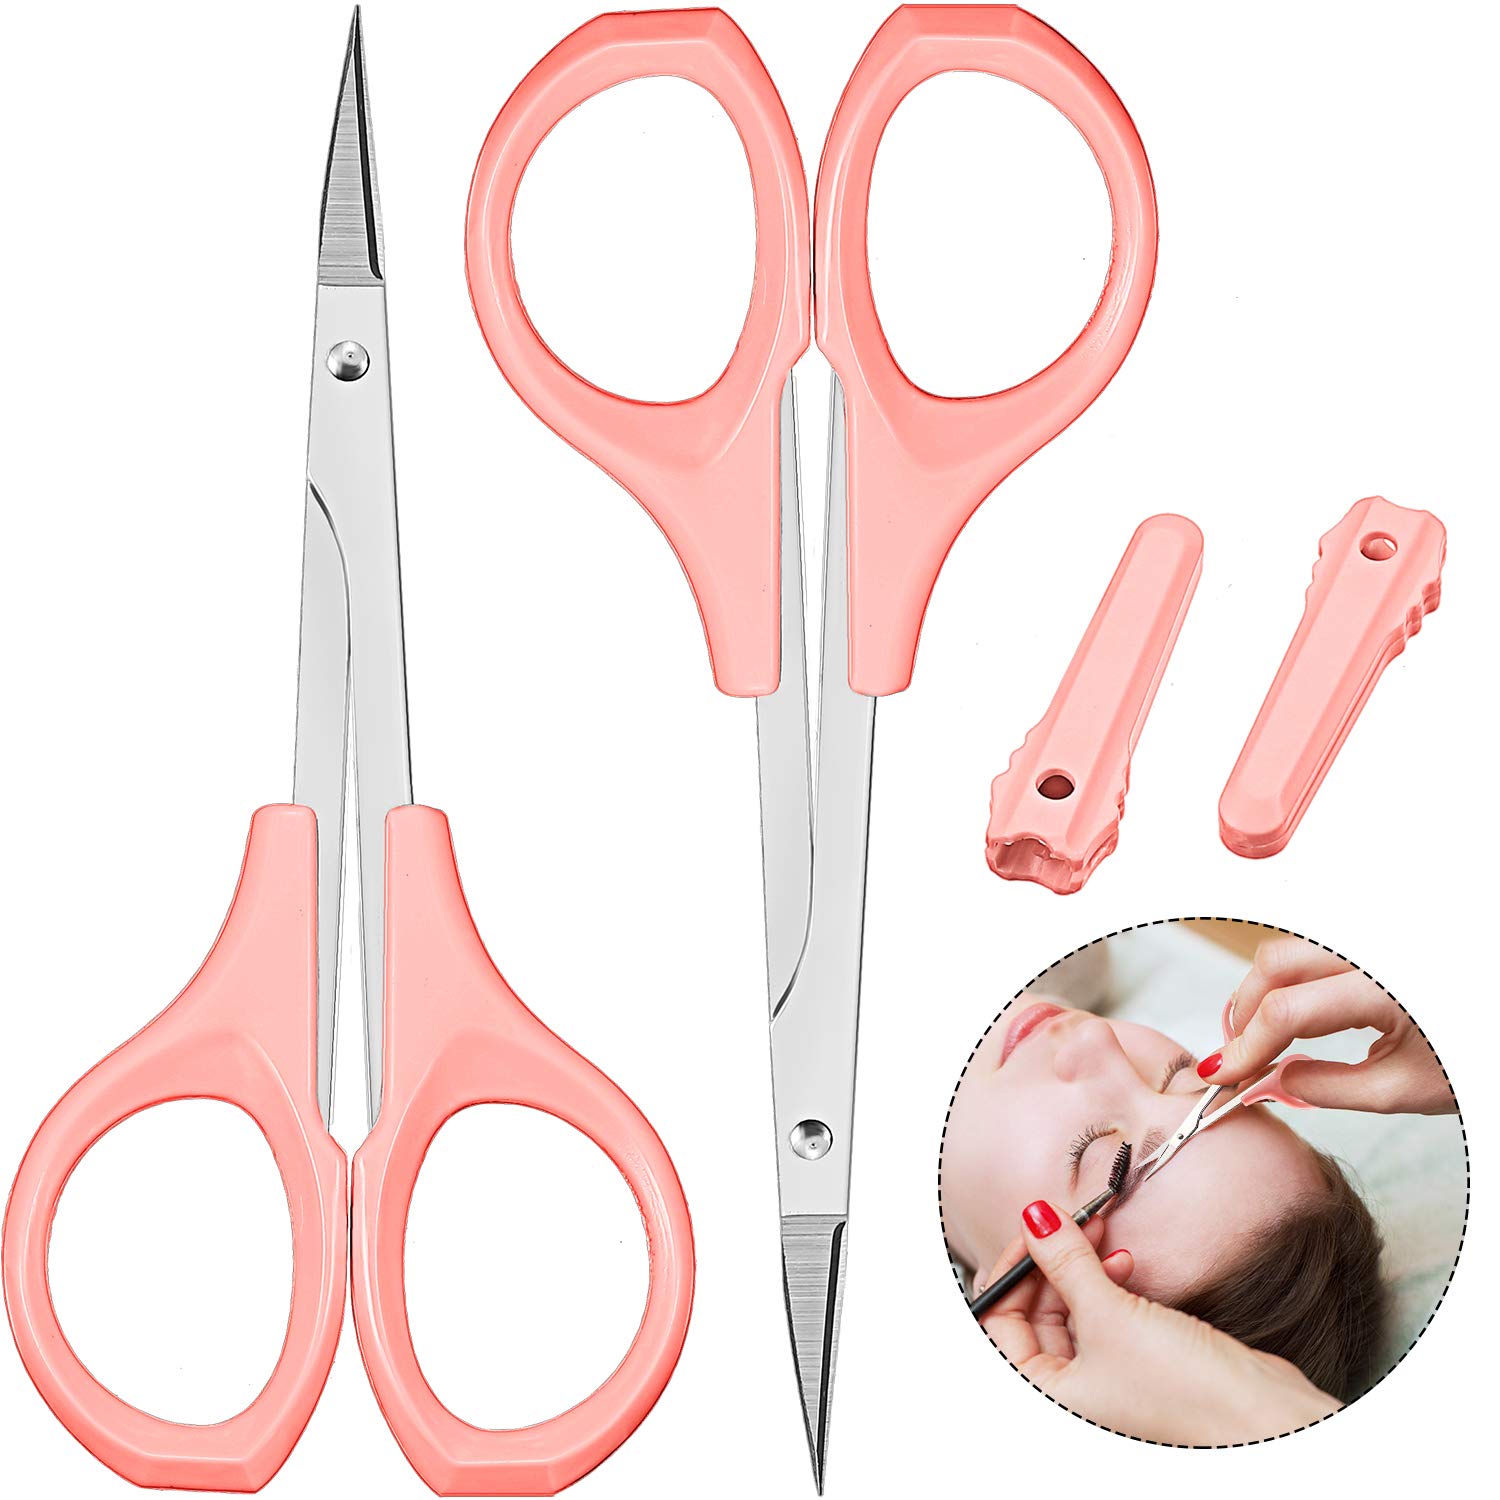 2 Pack Curved Craft Scissors Small Scissors Beauty Eyebrow Scissors  Stainless Steel Trimming Scissors for Eyebrow